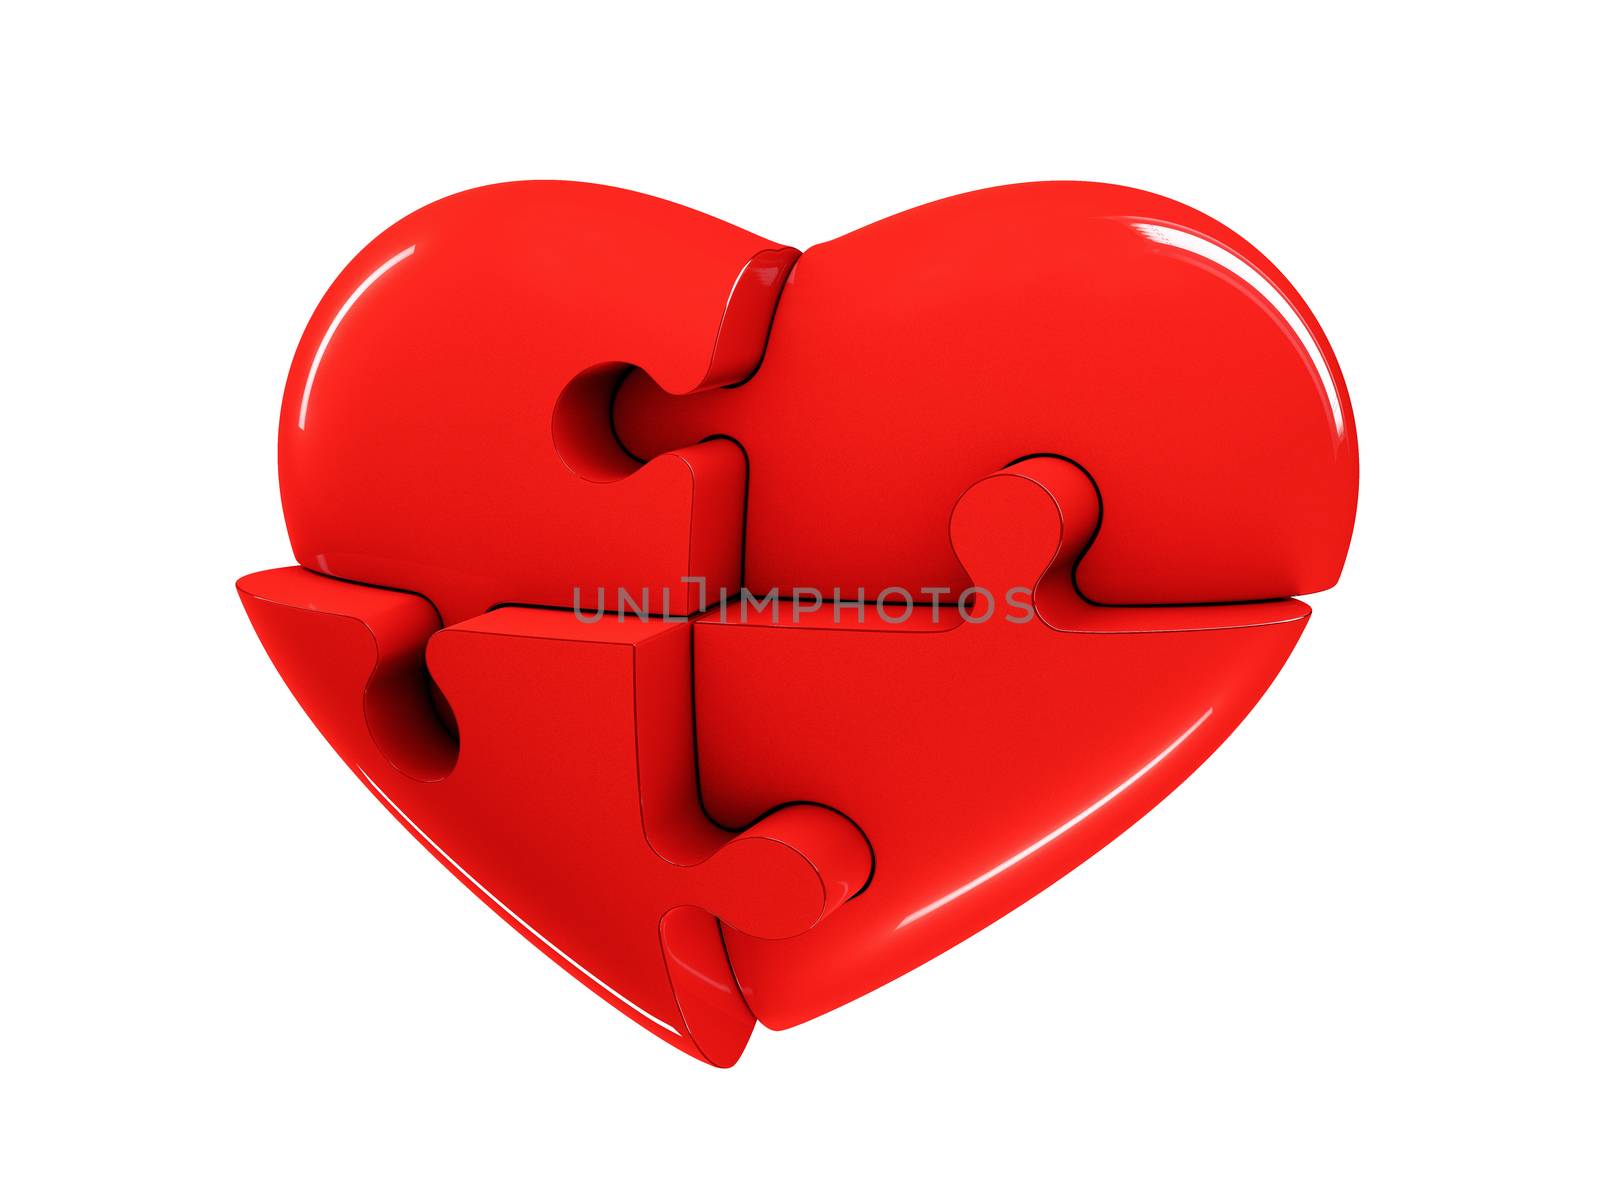 Red jigsaw puzzle heart diagram 3d illustration isolated on white background.